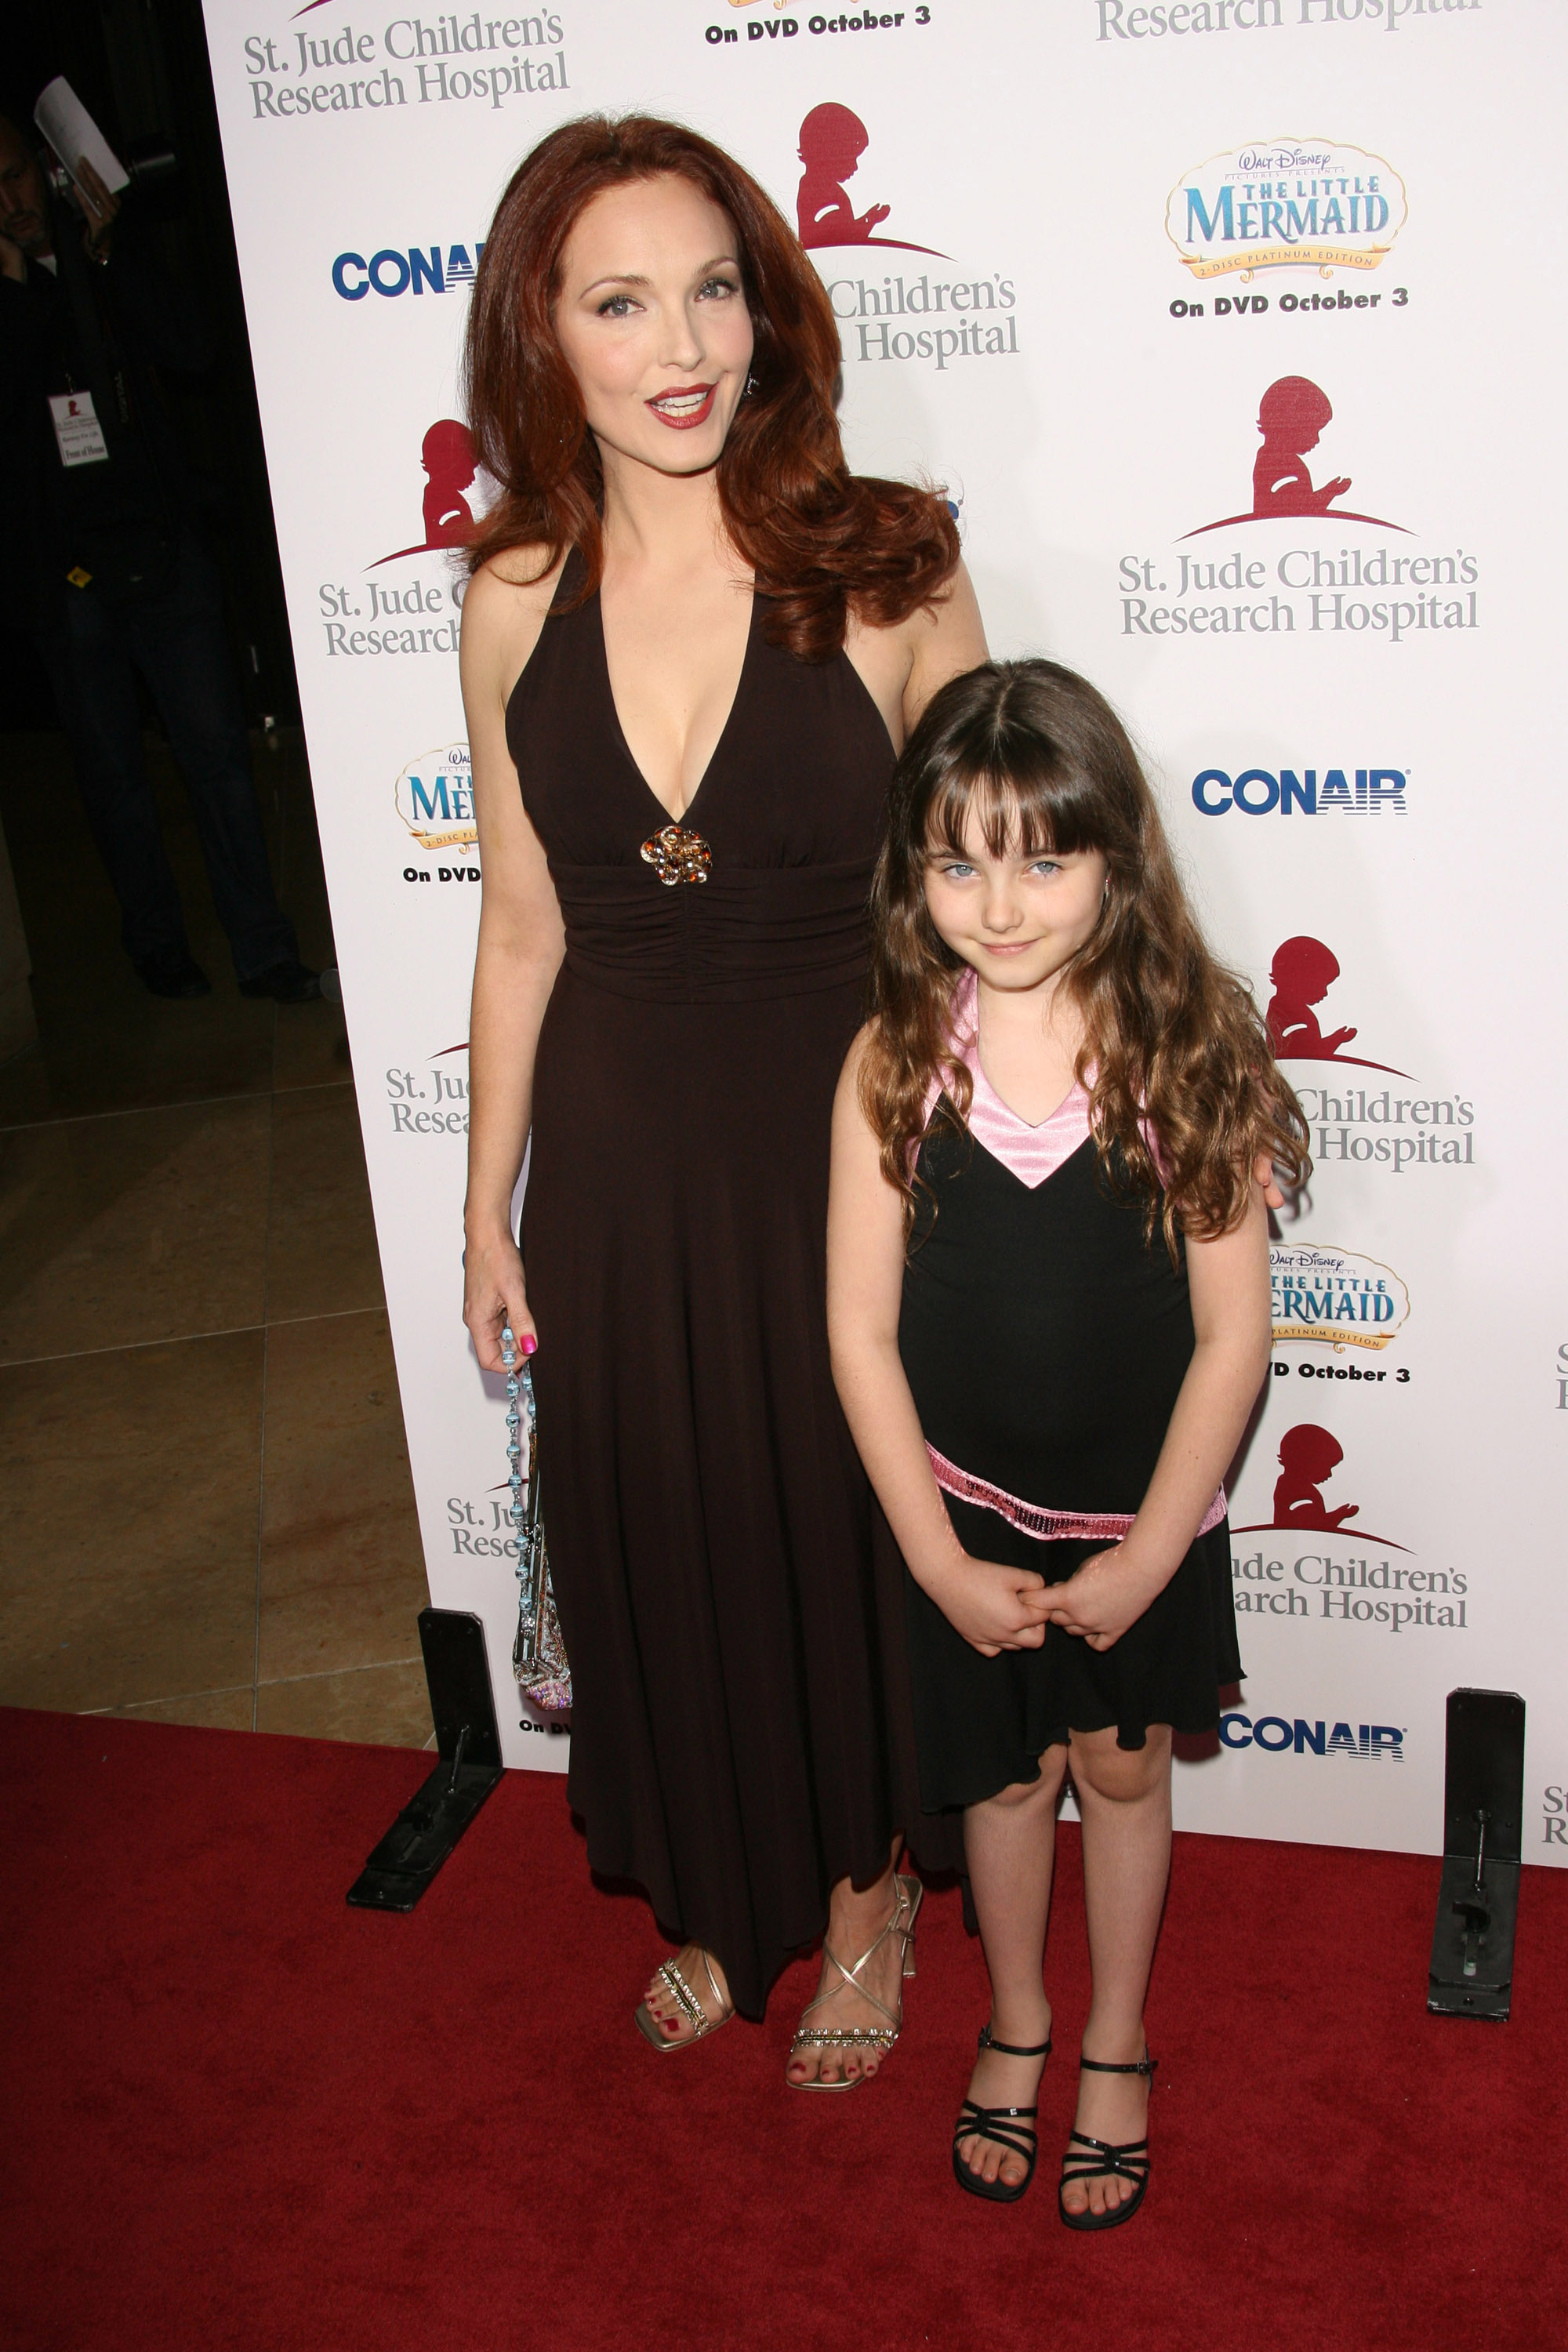 Amy Yasbeck and Stella Ritter during the "Runway for Life" Celebrity Fashion Show in Beverly Hills, California on September 15, 2006 | Source: Getty Images